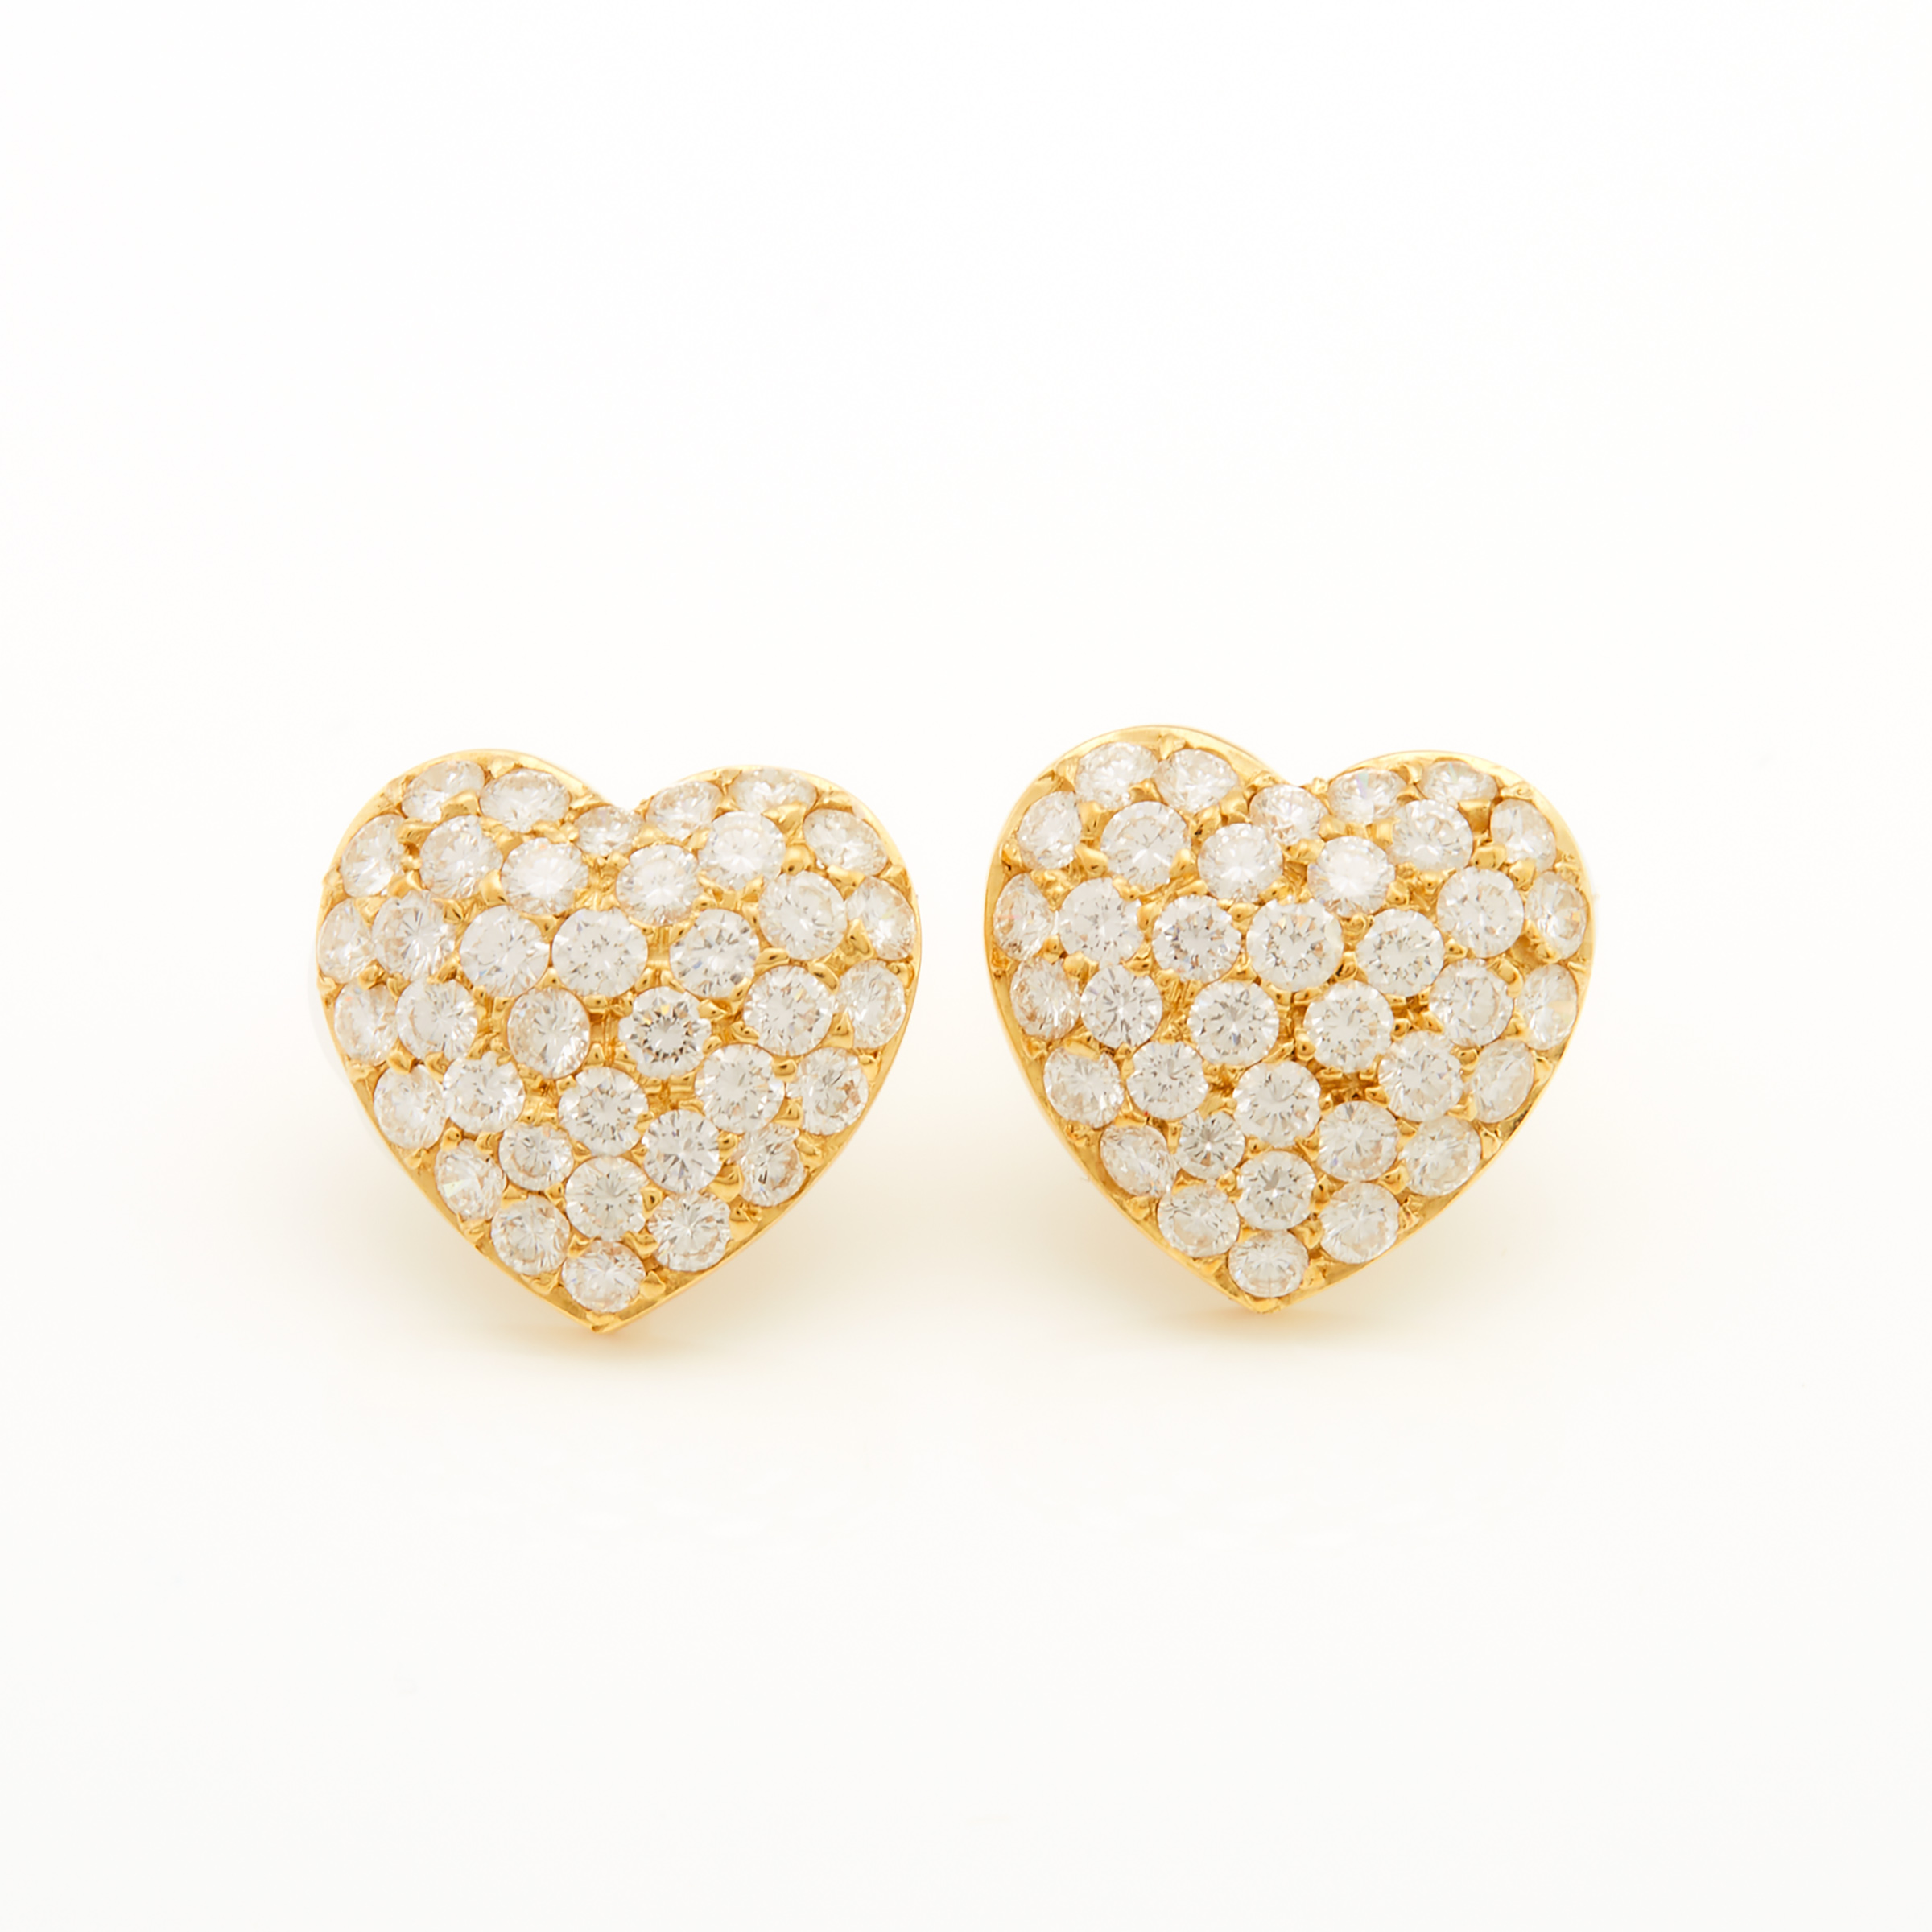 Pair Of 18k Yellow Gold Heart-Shaped Button Earrings 